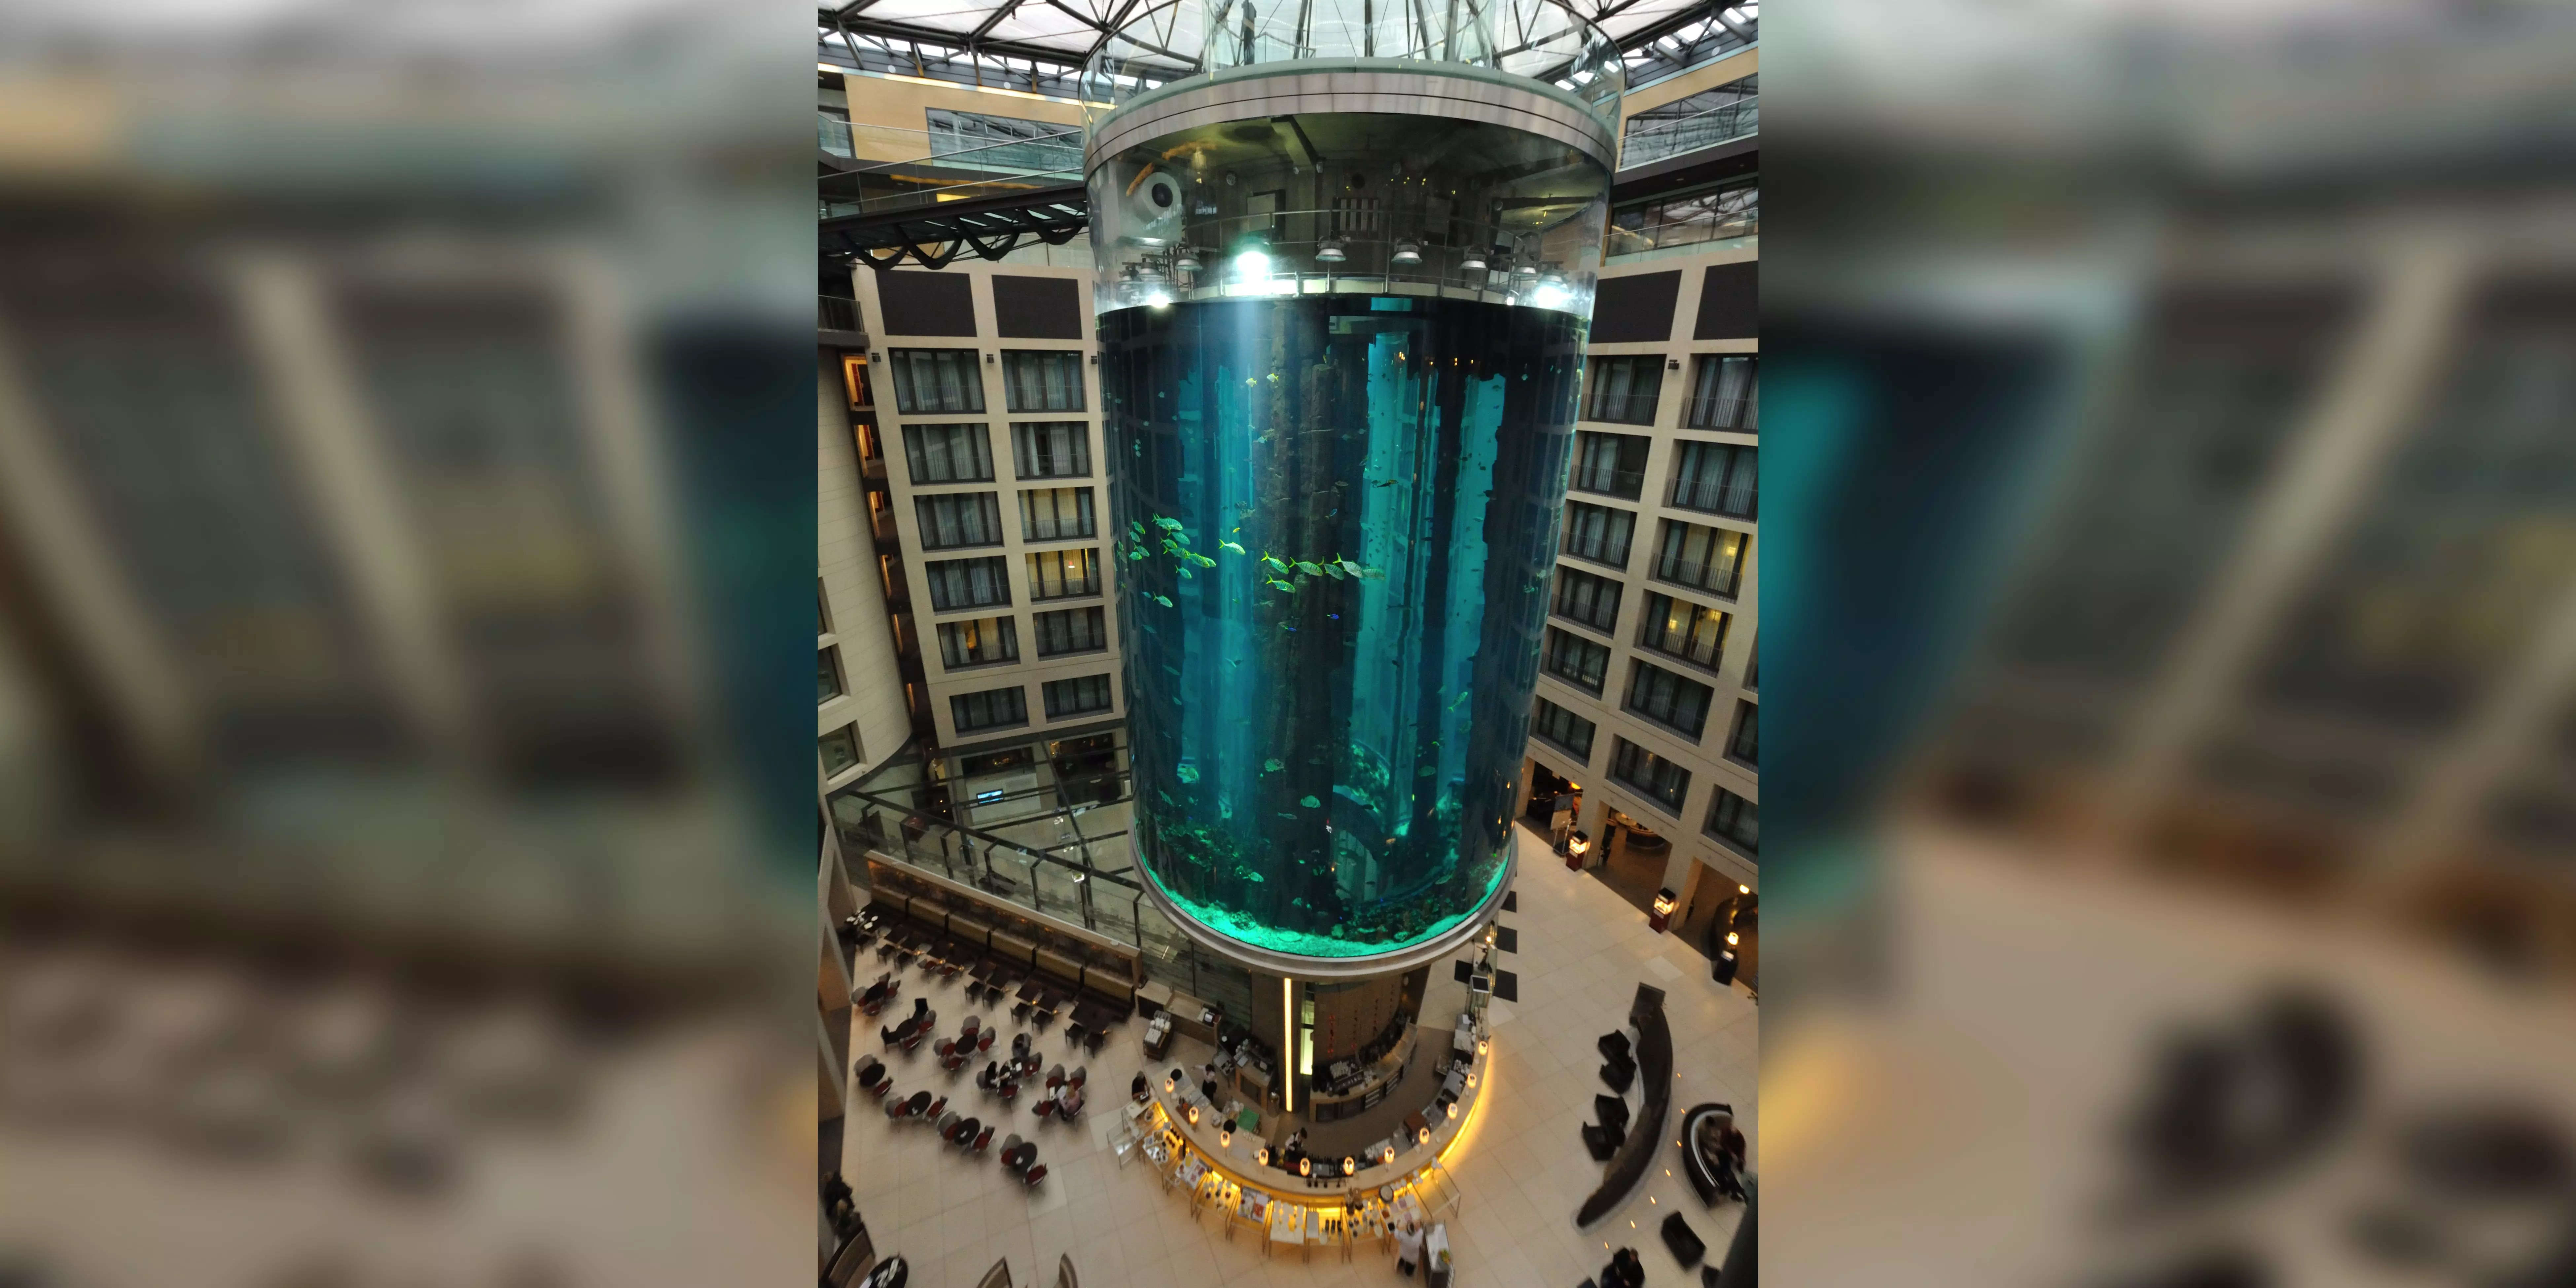 An enormous fish tank in a Berlin hotel lobby burst, spilling 250,000 gallons of water and likely killing all its tropical fish | Business Insider India